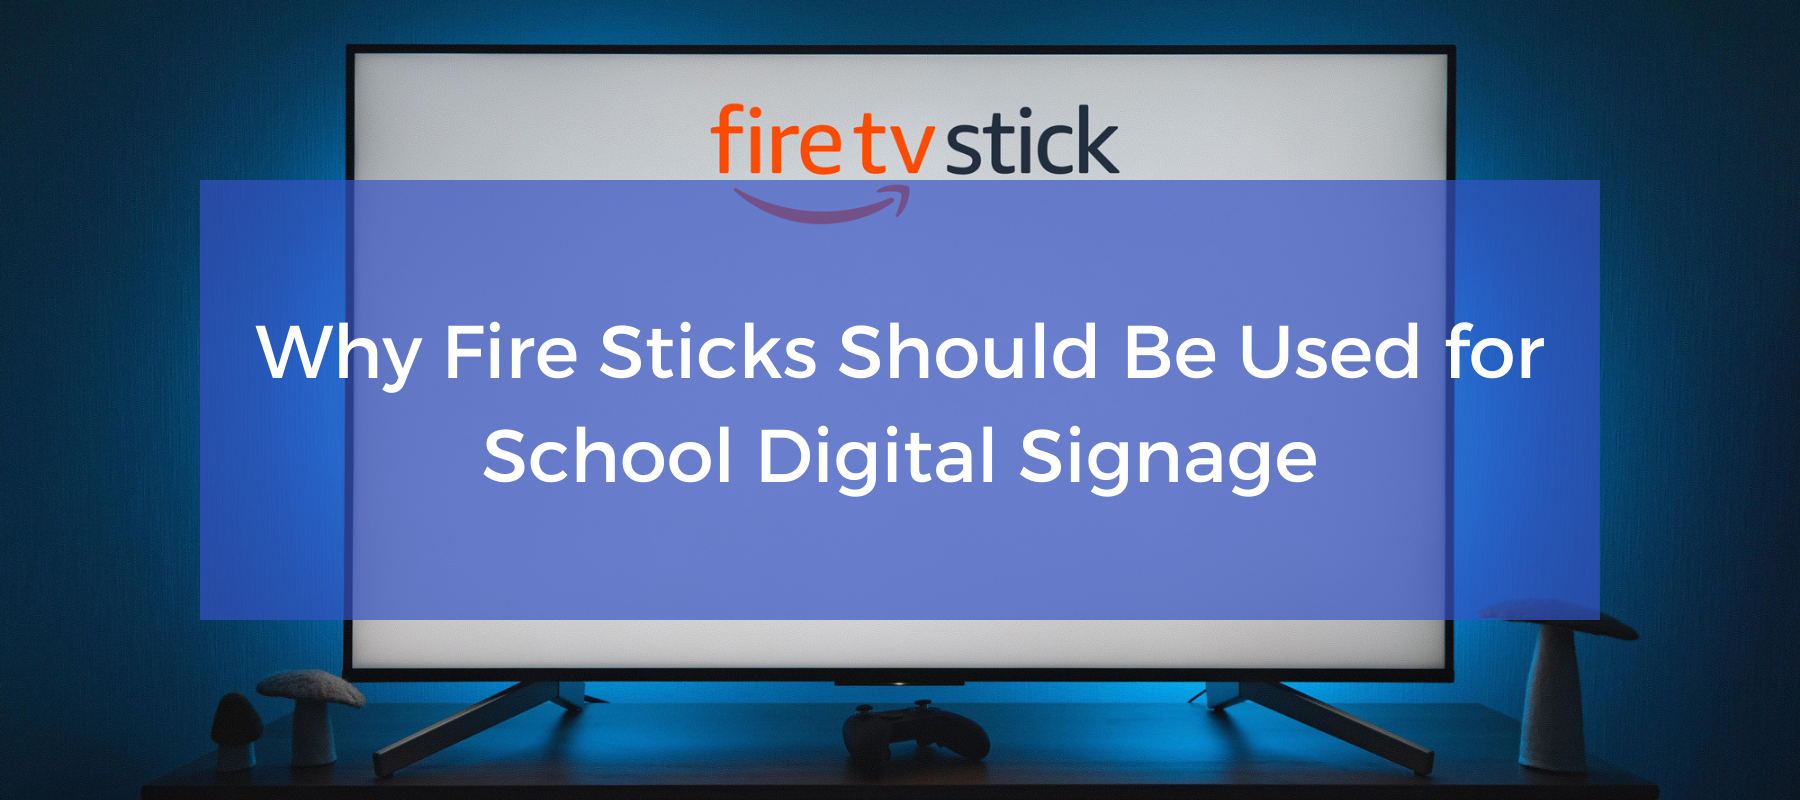 Why Fire Sticks Should Be Used For K-12 School Digital Signage Featured Image.